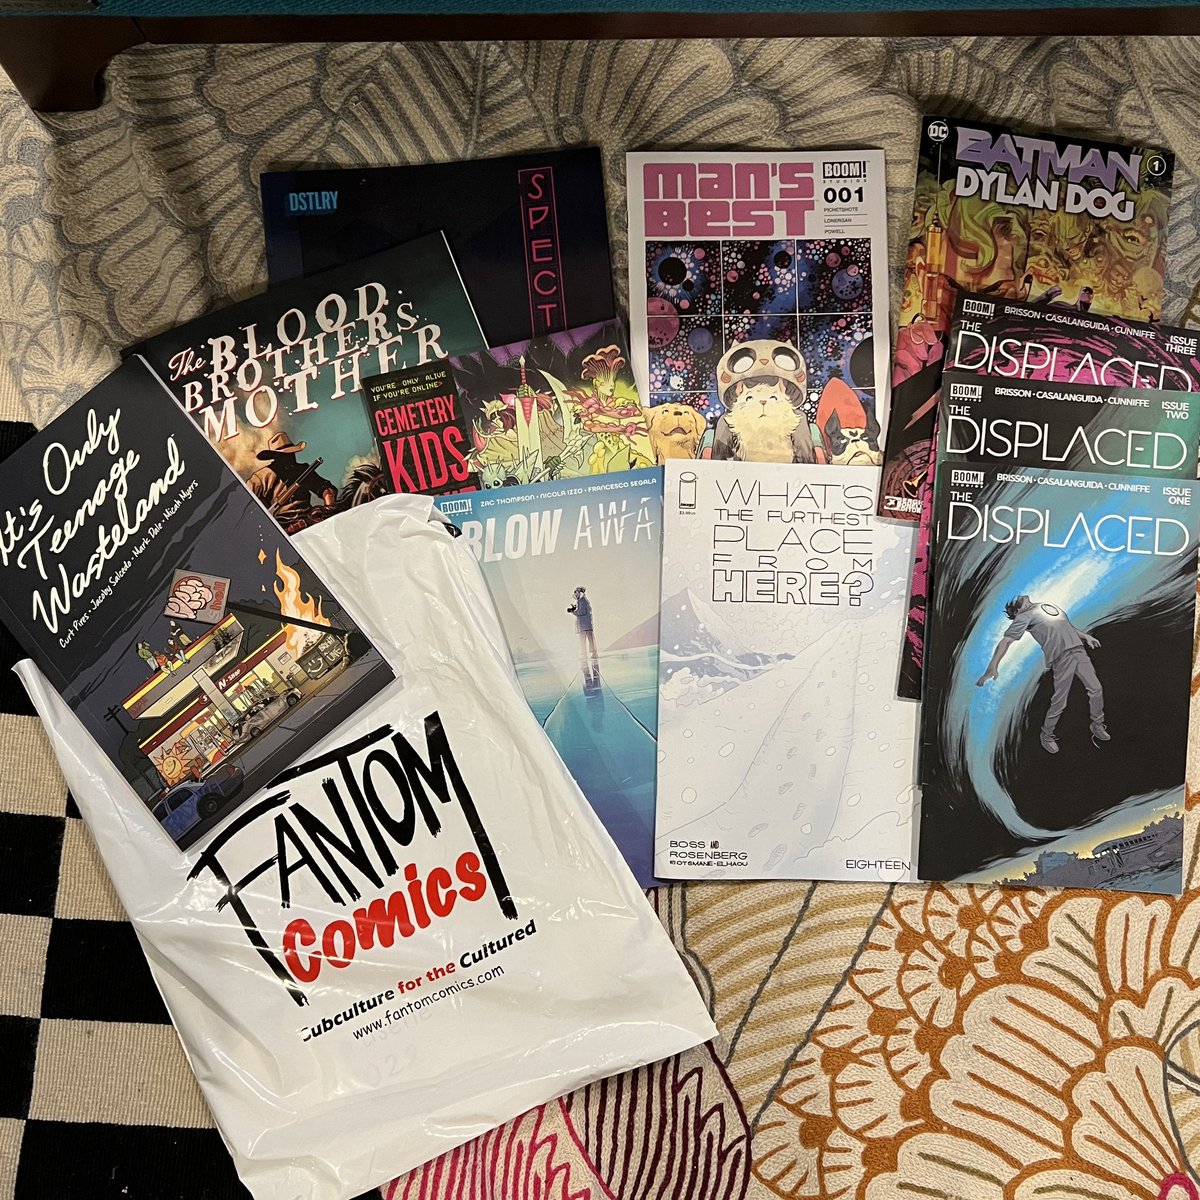 I stopped by the incredible @FantomComics and picked up a ton of excellent comics. I love Fantom. It’s the most friendly, community focused shop. If you go in, they have flyers with codes to read the first issue of A Ghost Arm Made of Angry Ghosts for free. Go get some comics!